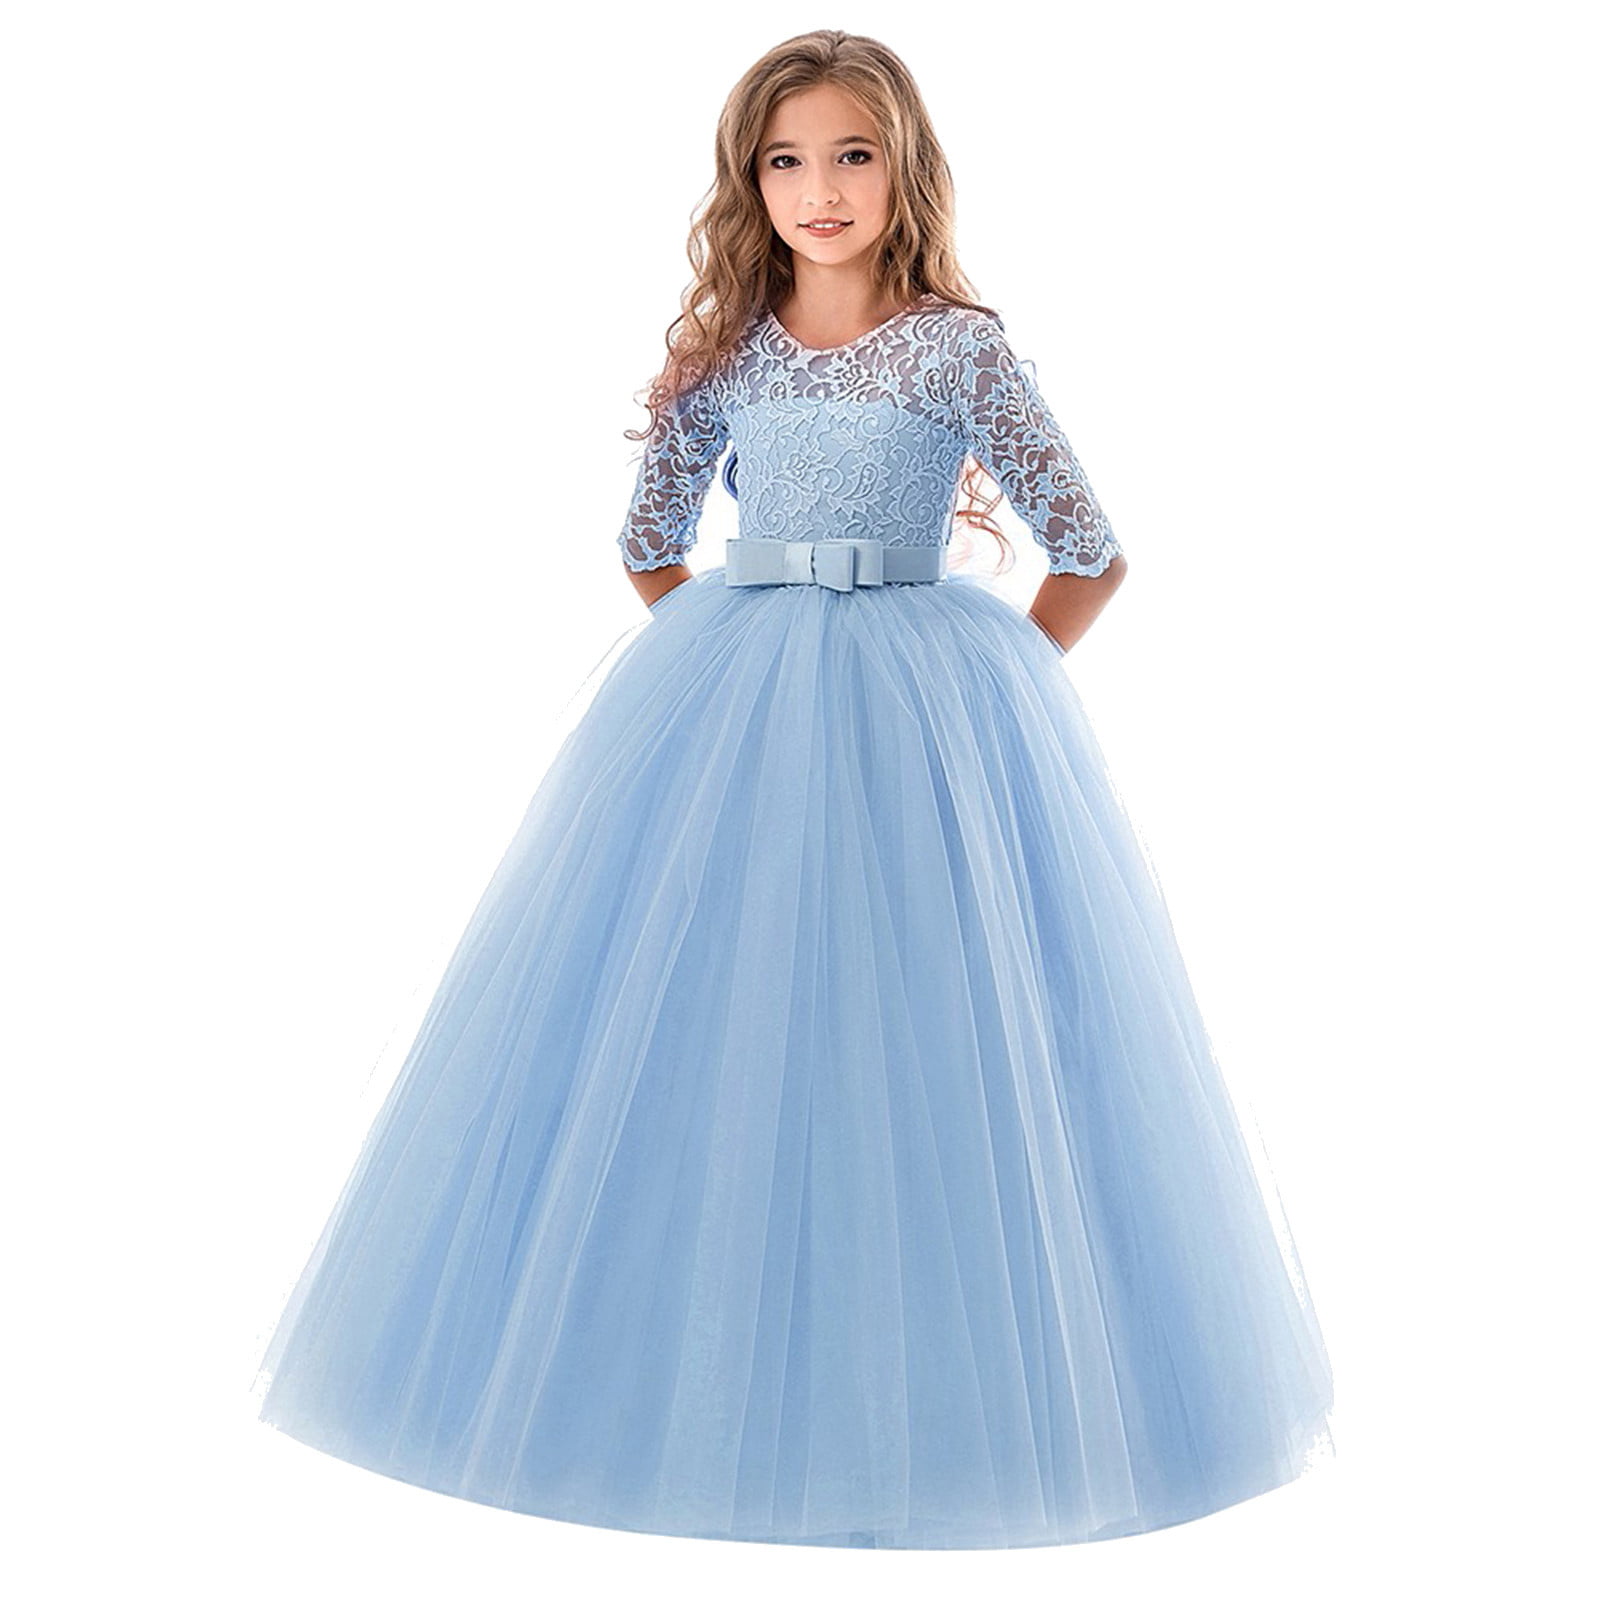 Tulle Sleeve Girls' Dresses 4-12 Years Flowers Beautiful Lace